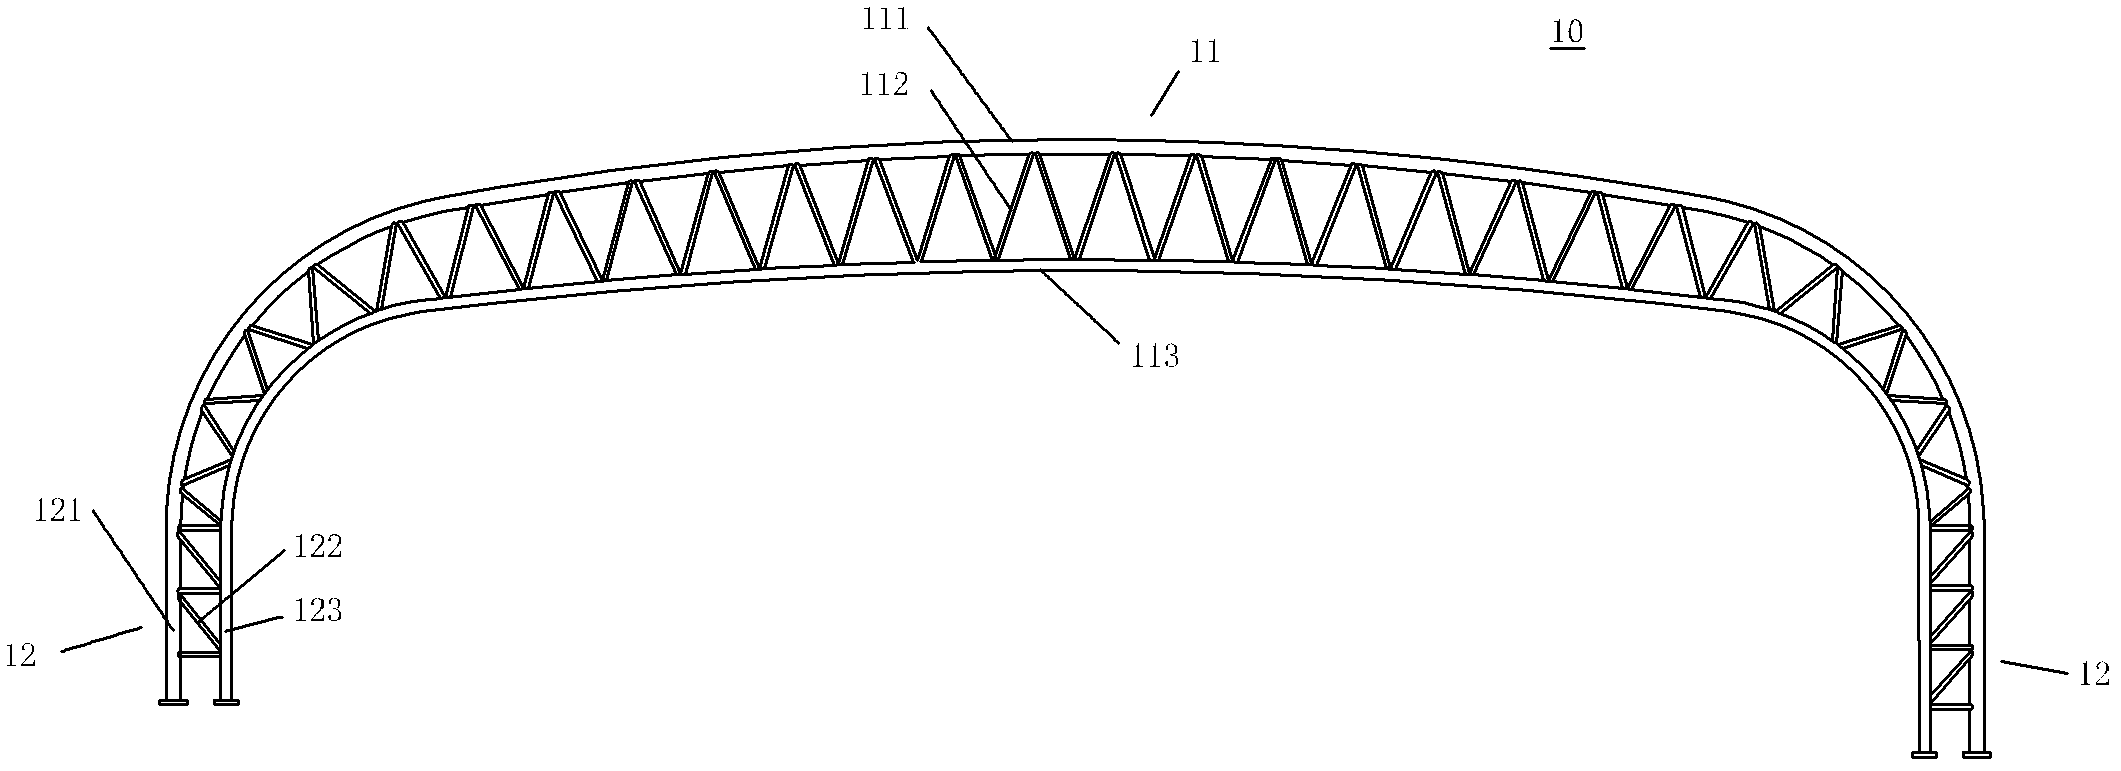 Carriage stepped unloading method after expanding large-span truss structure